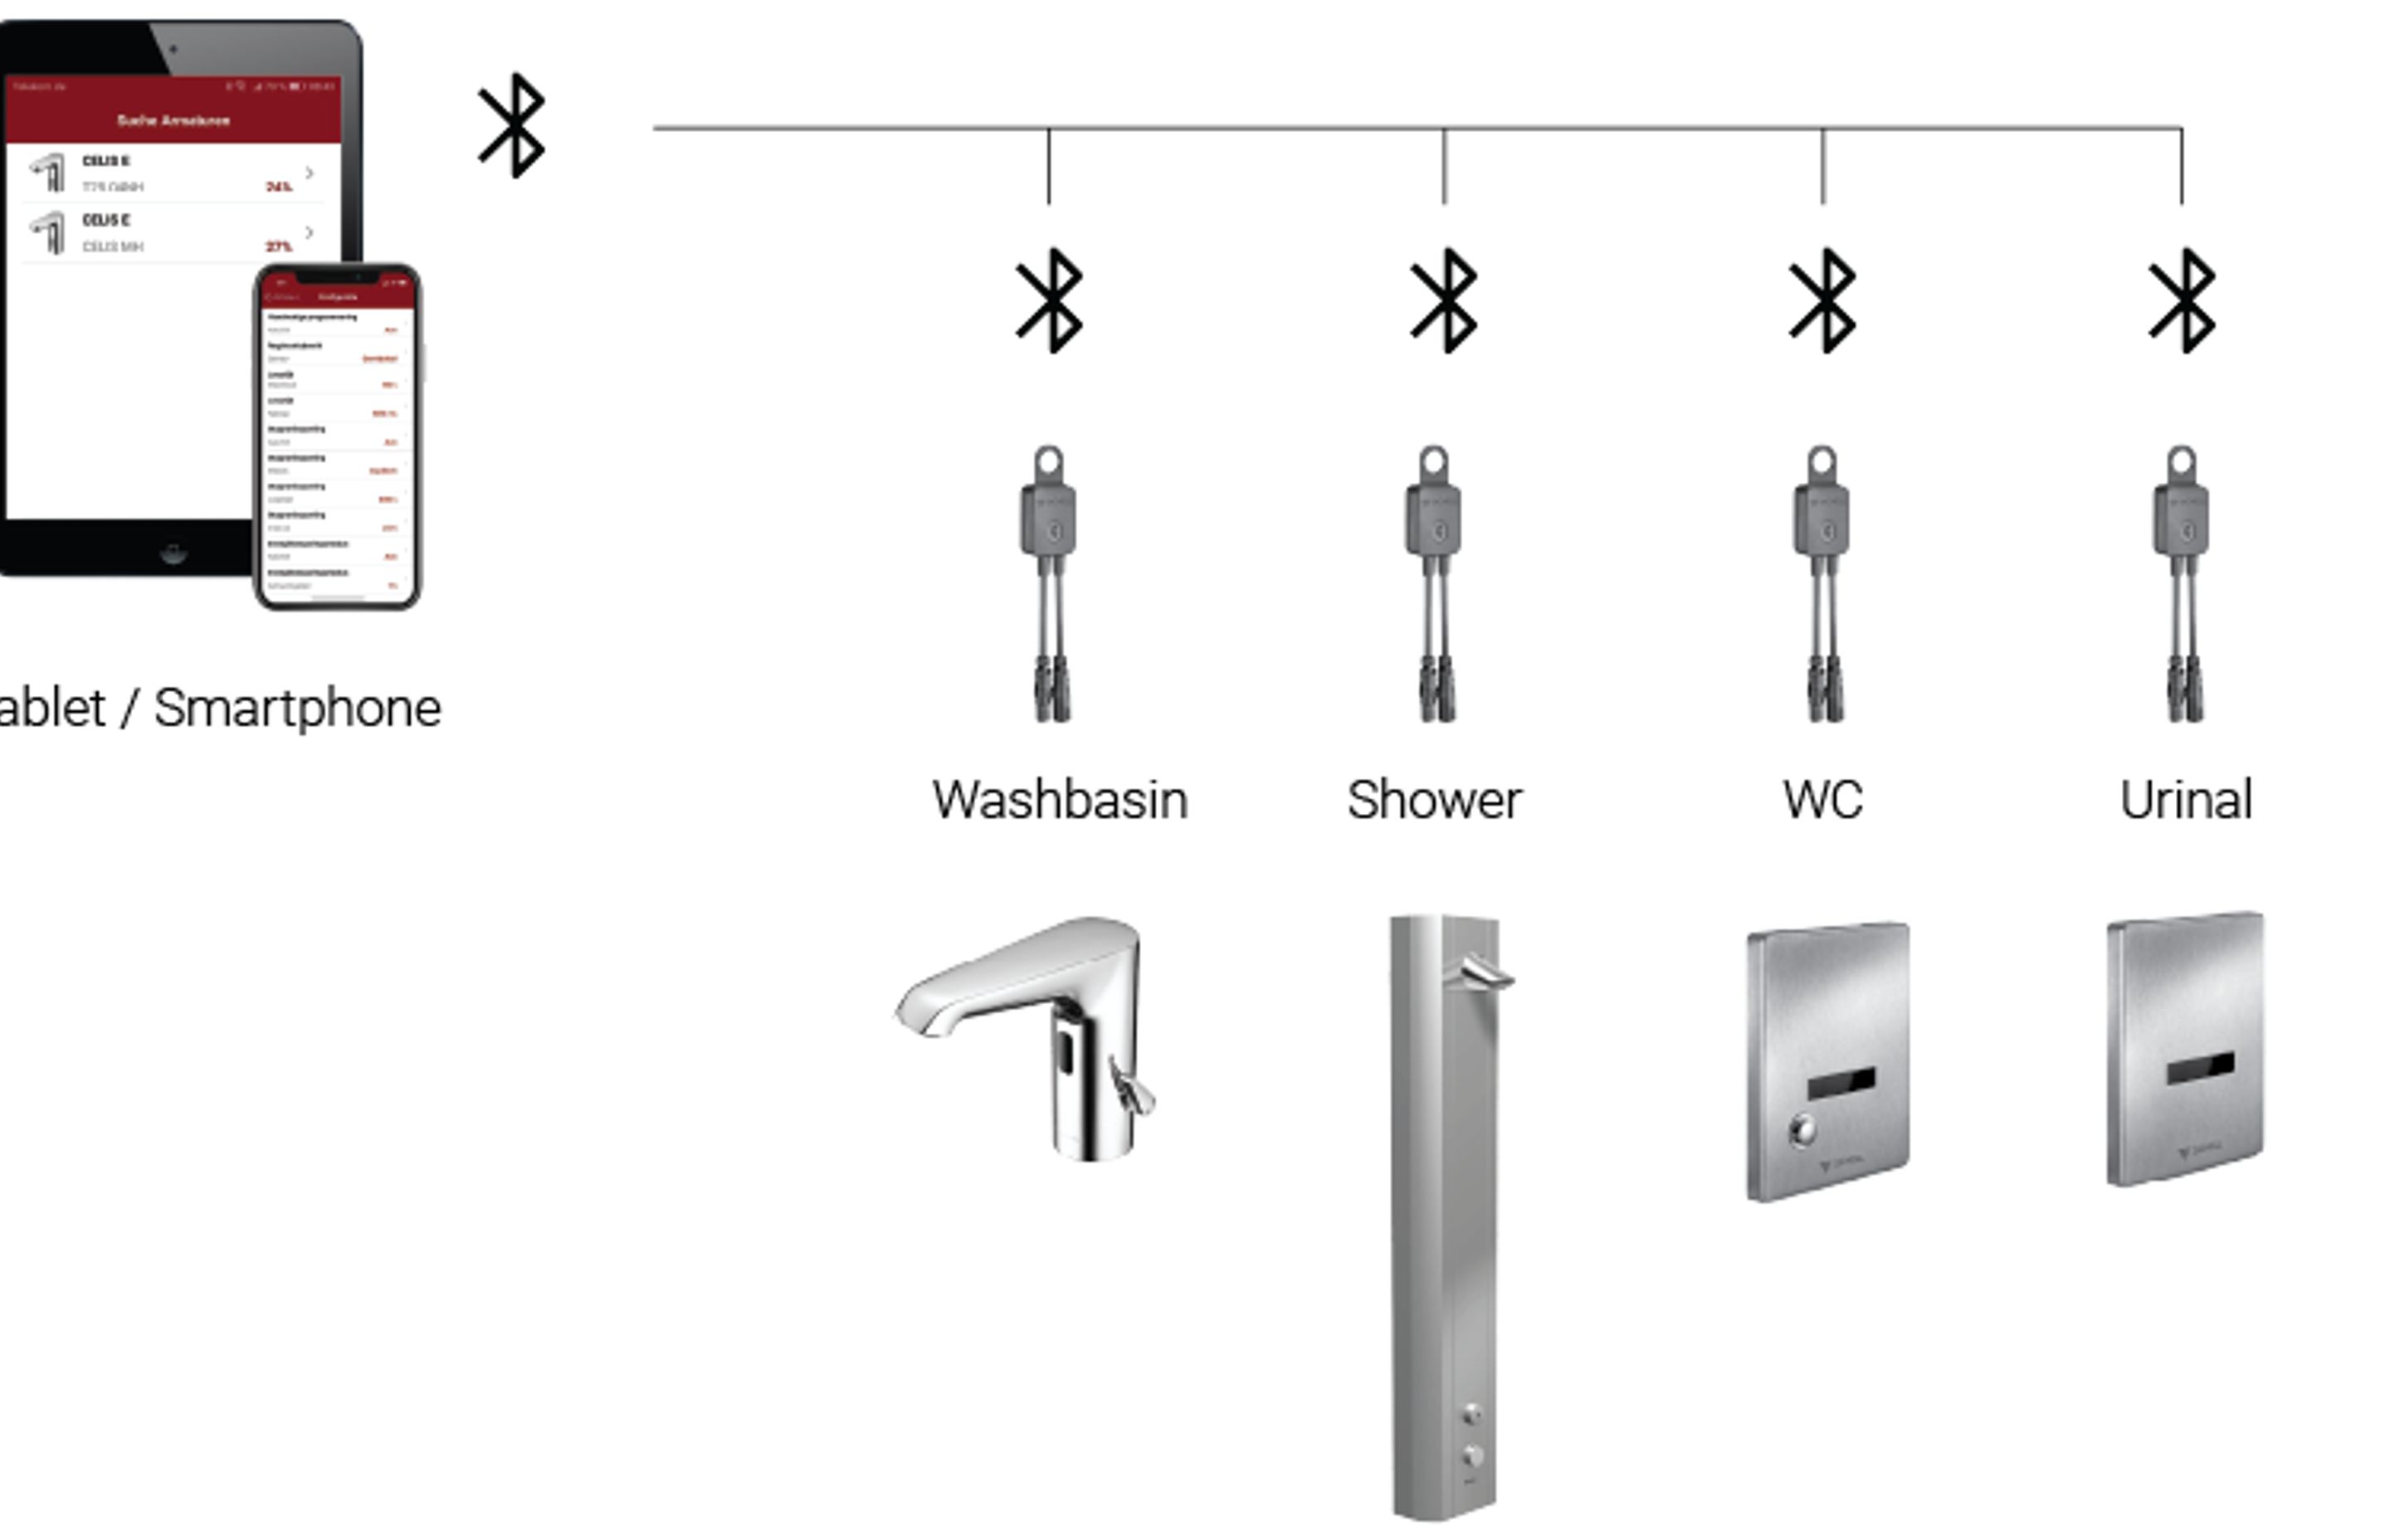 Utilising wireless Bluetooth technology, SSC allows for the practical and efficient setting of parameters on individual fittings, providing advanced control and ongoing monitoring of water quality in public bathrooms.